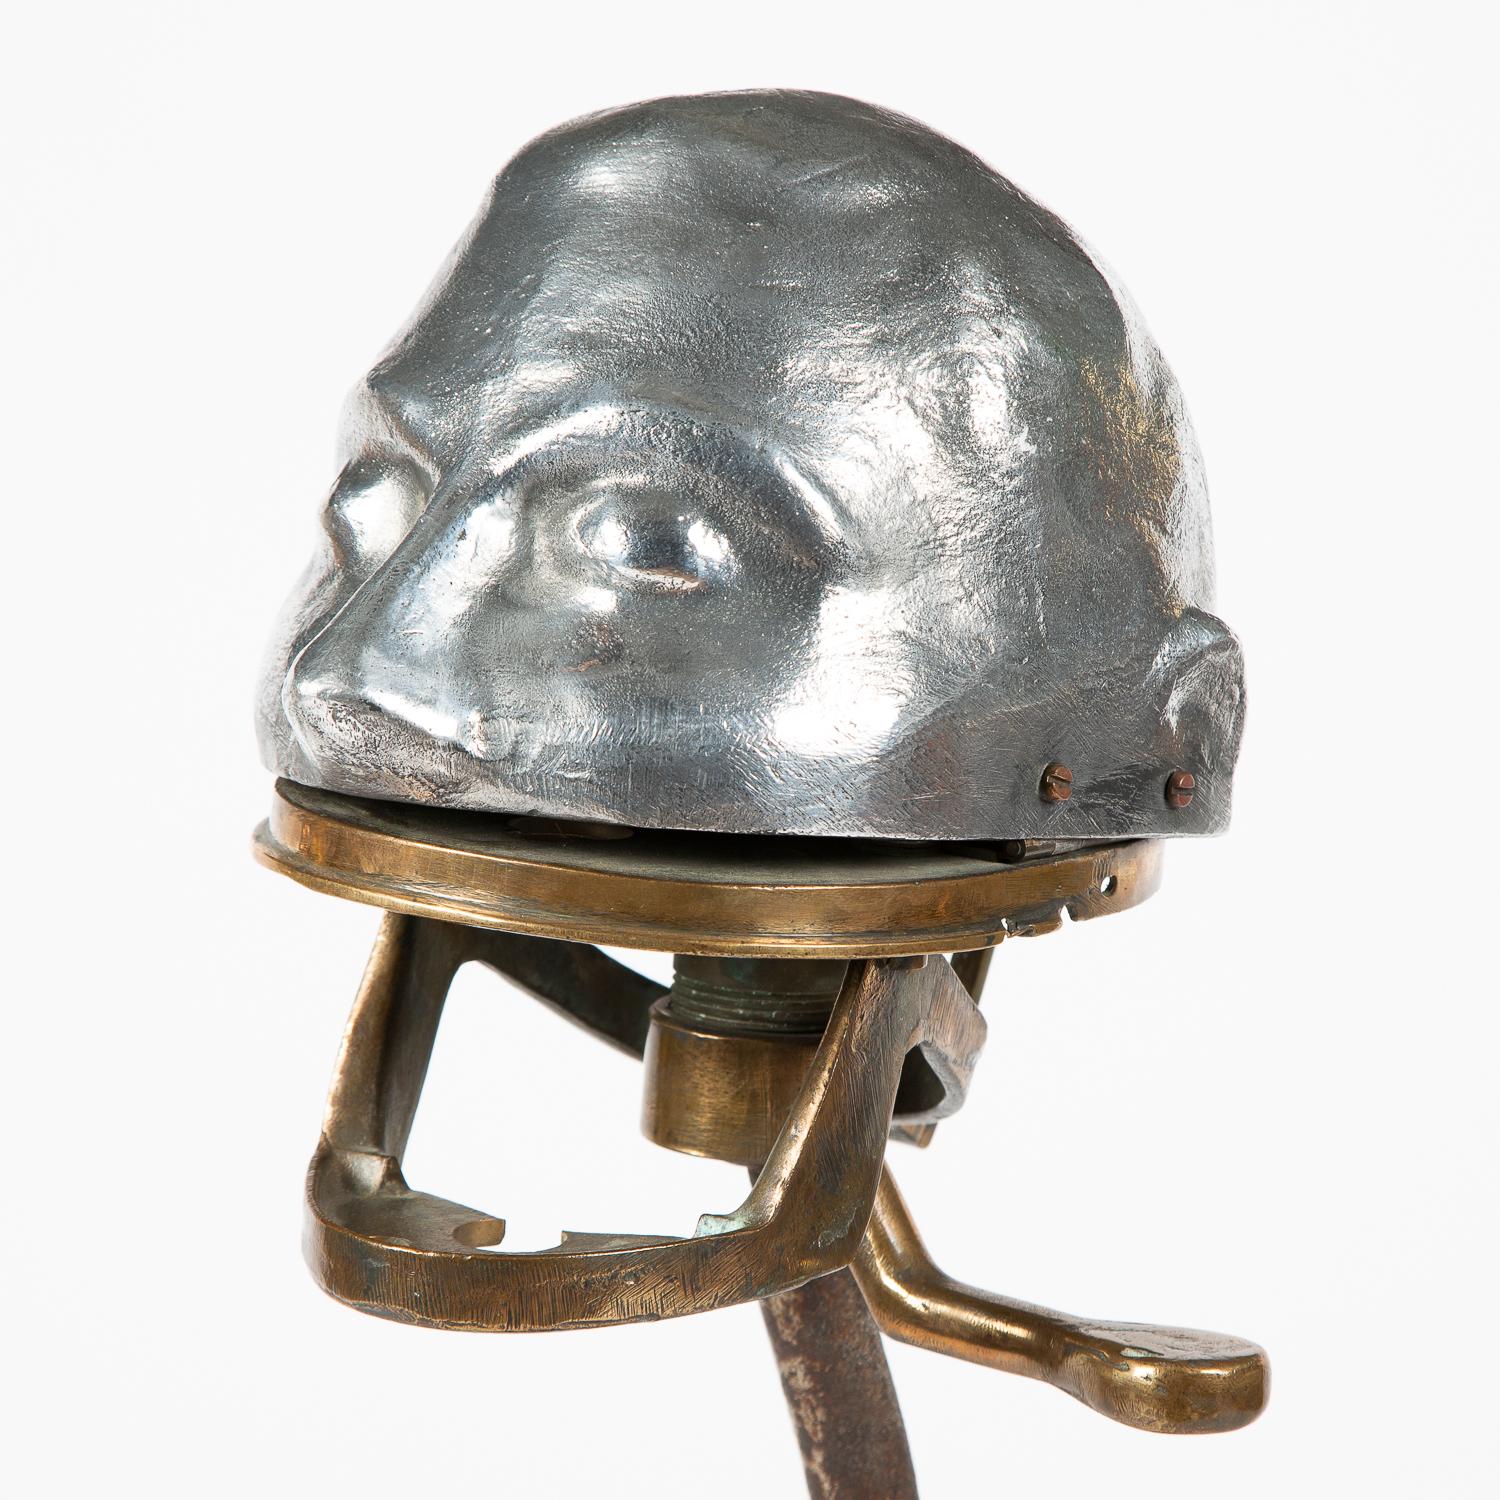 An early 20th century aluminum and bronze dental articulator or phantom head, mounted on an iron display stand, circa 1910.